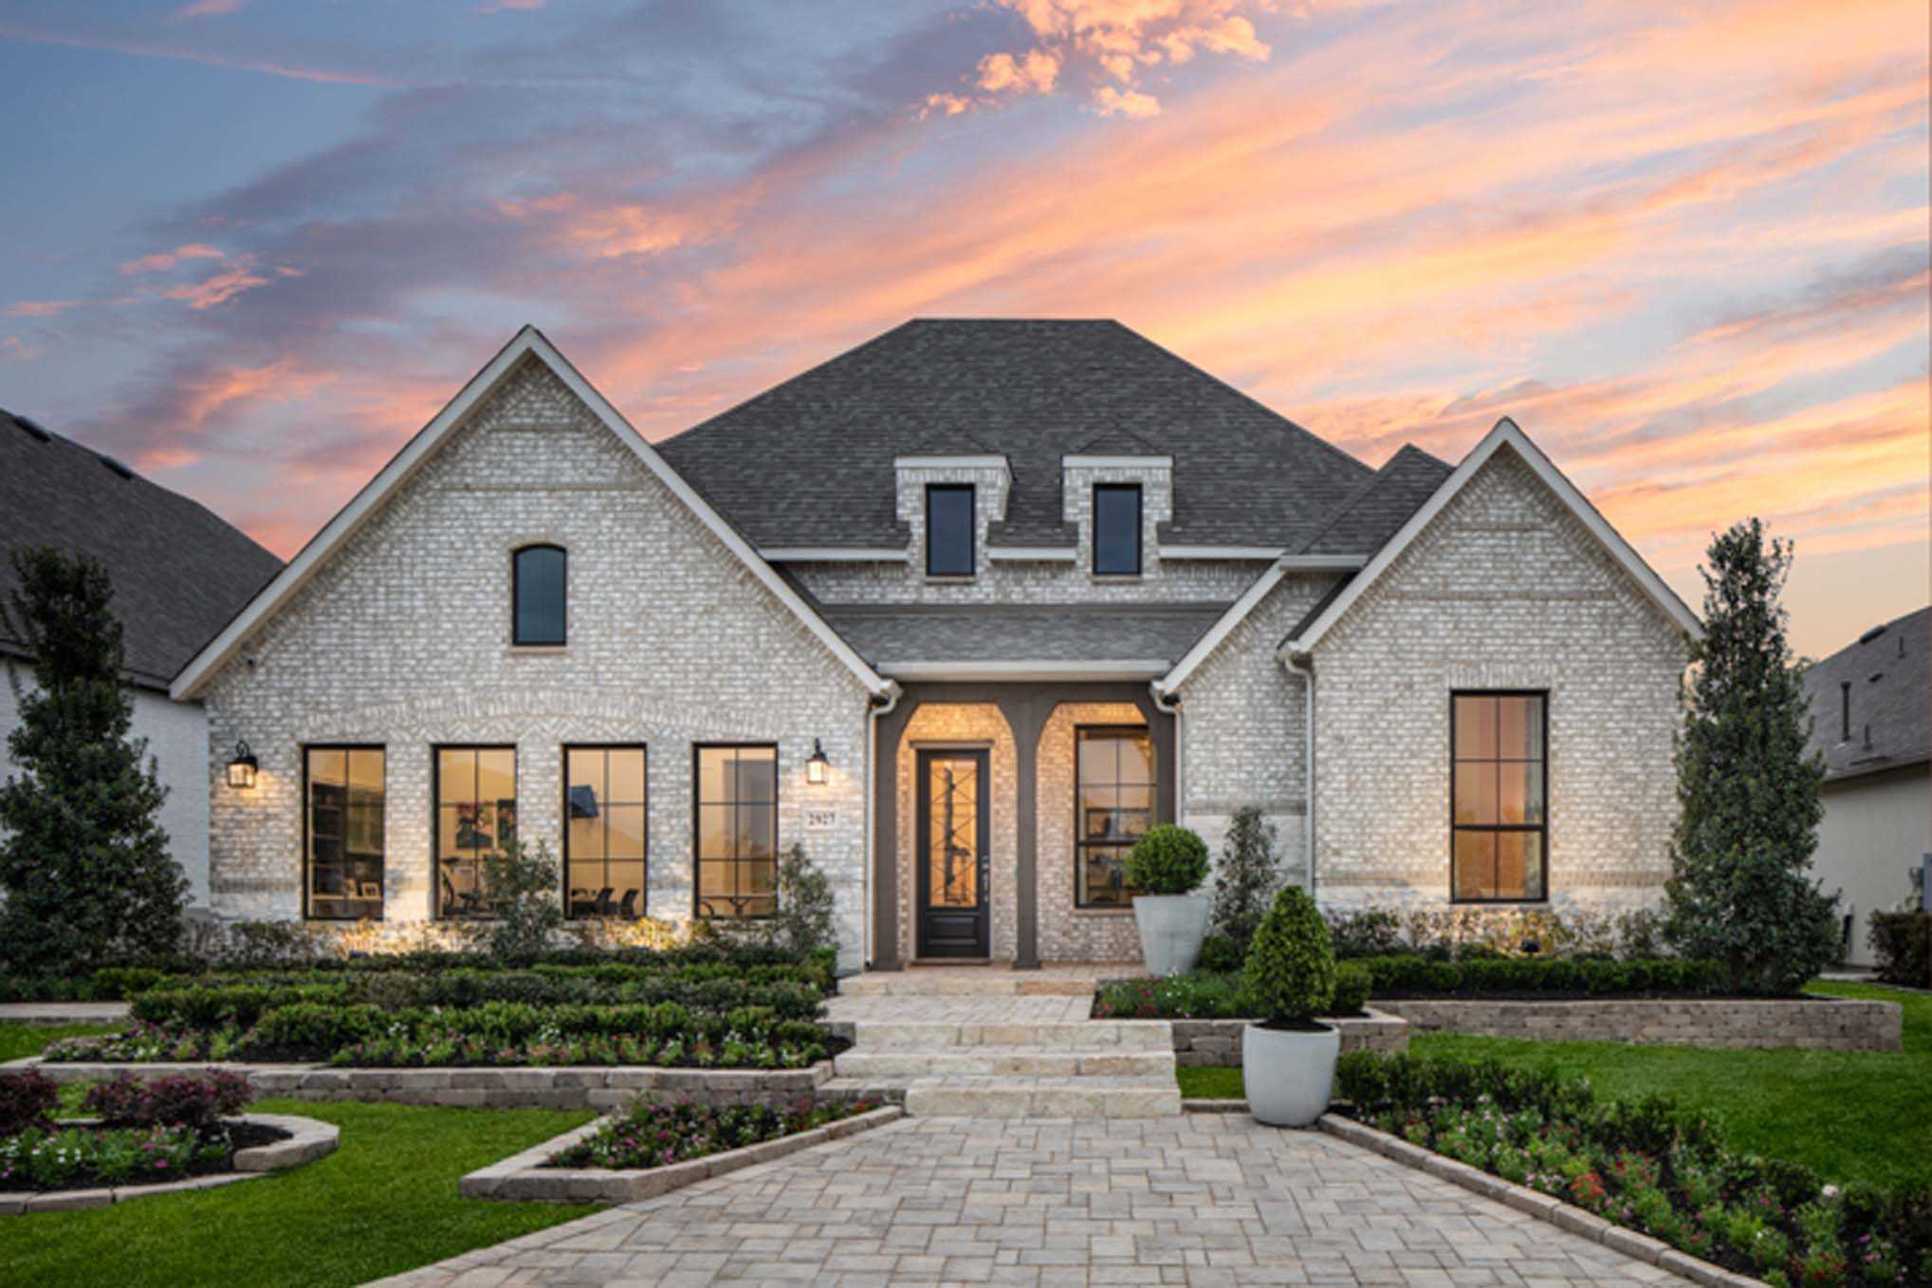 Visit our model home!